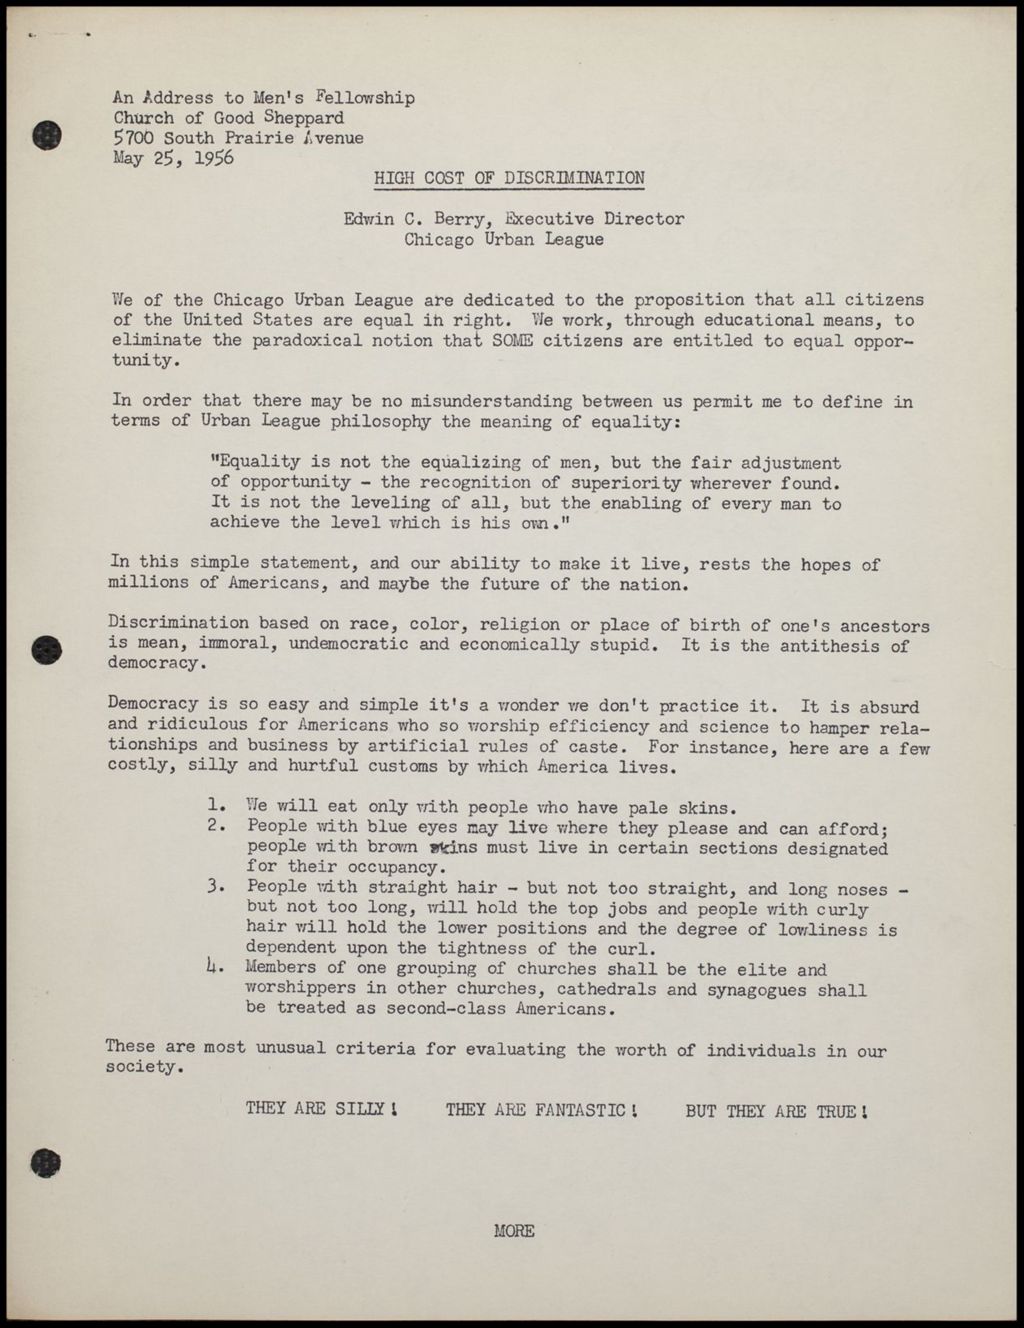 Research Miscellaneous Reports, 1956-1964 (Folder III-2455)